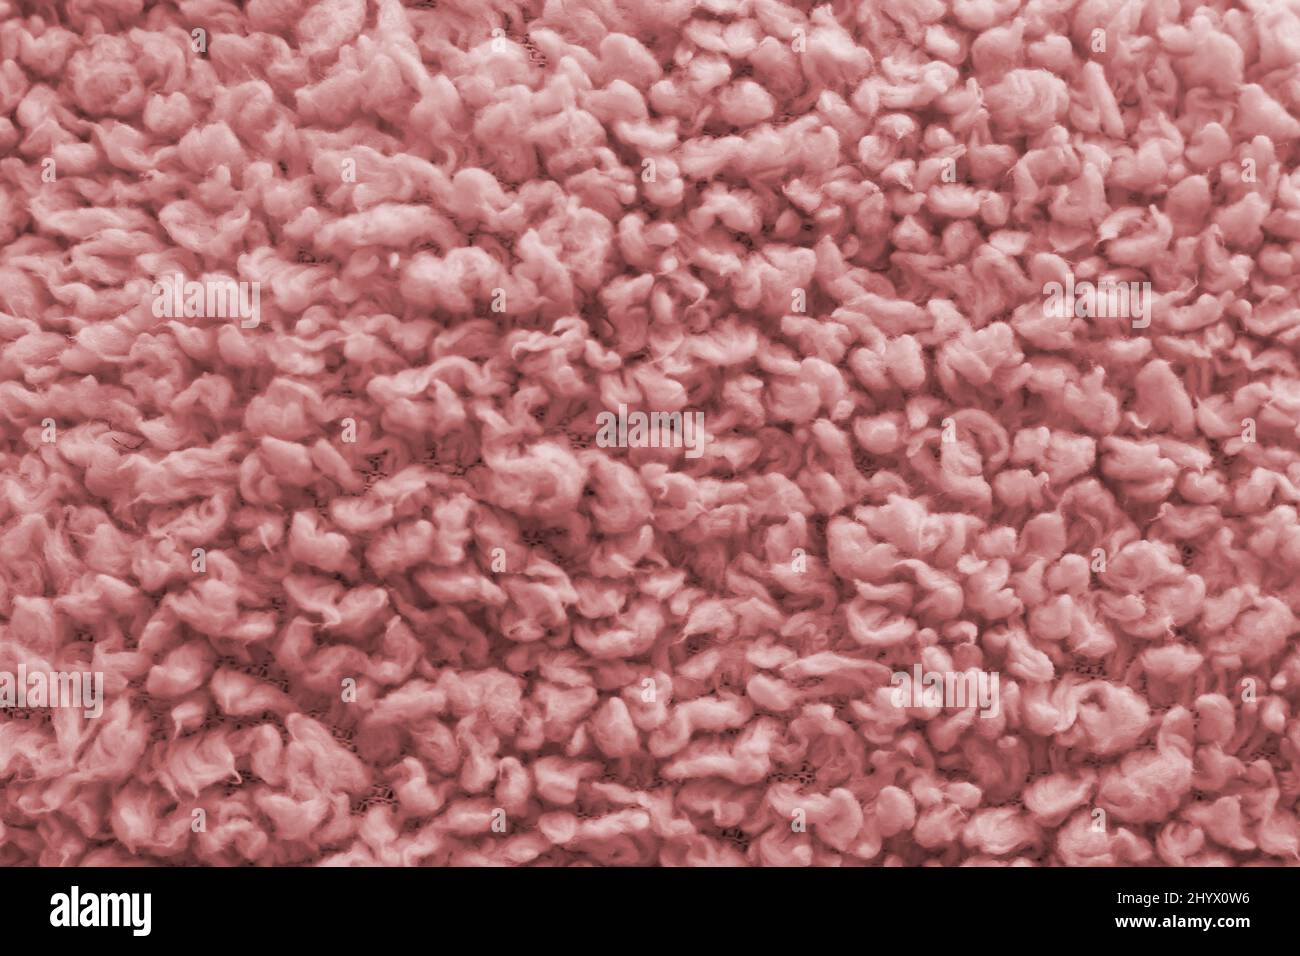 Soft pink wool texture as background, closeup Stock Photo